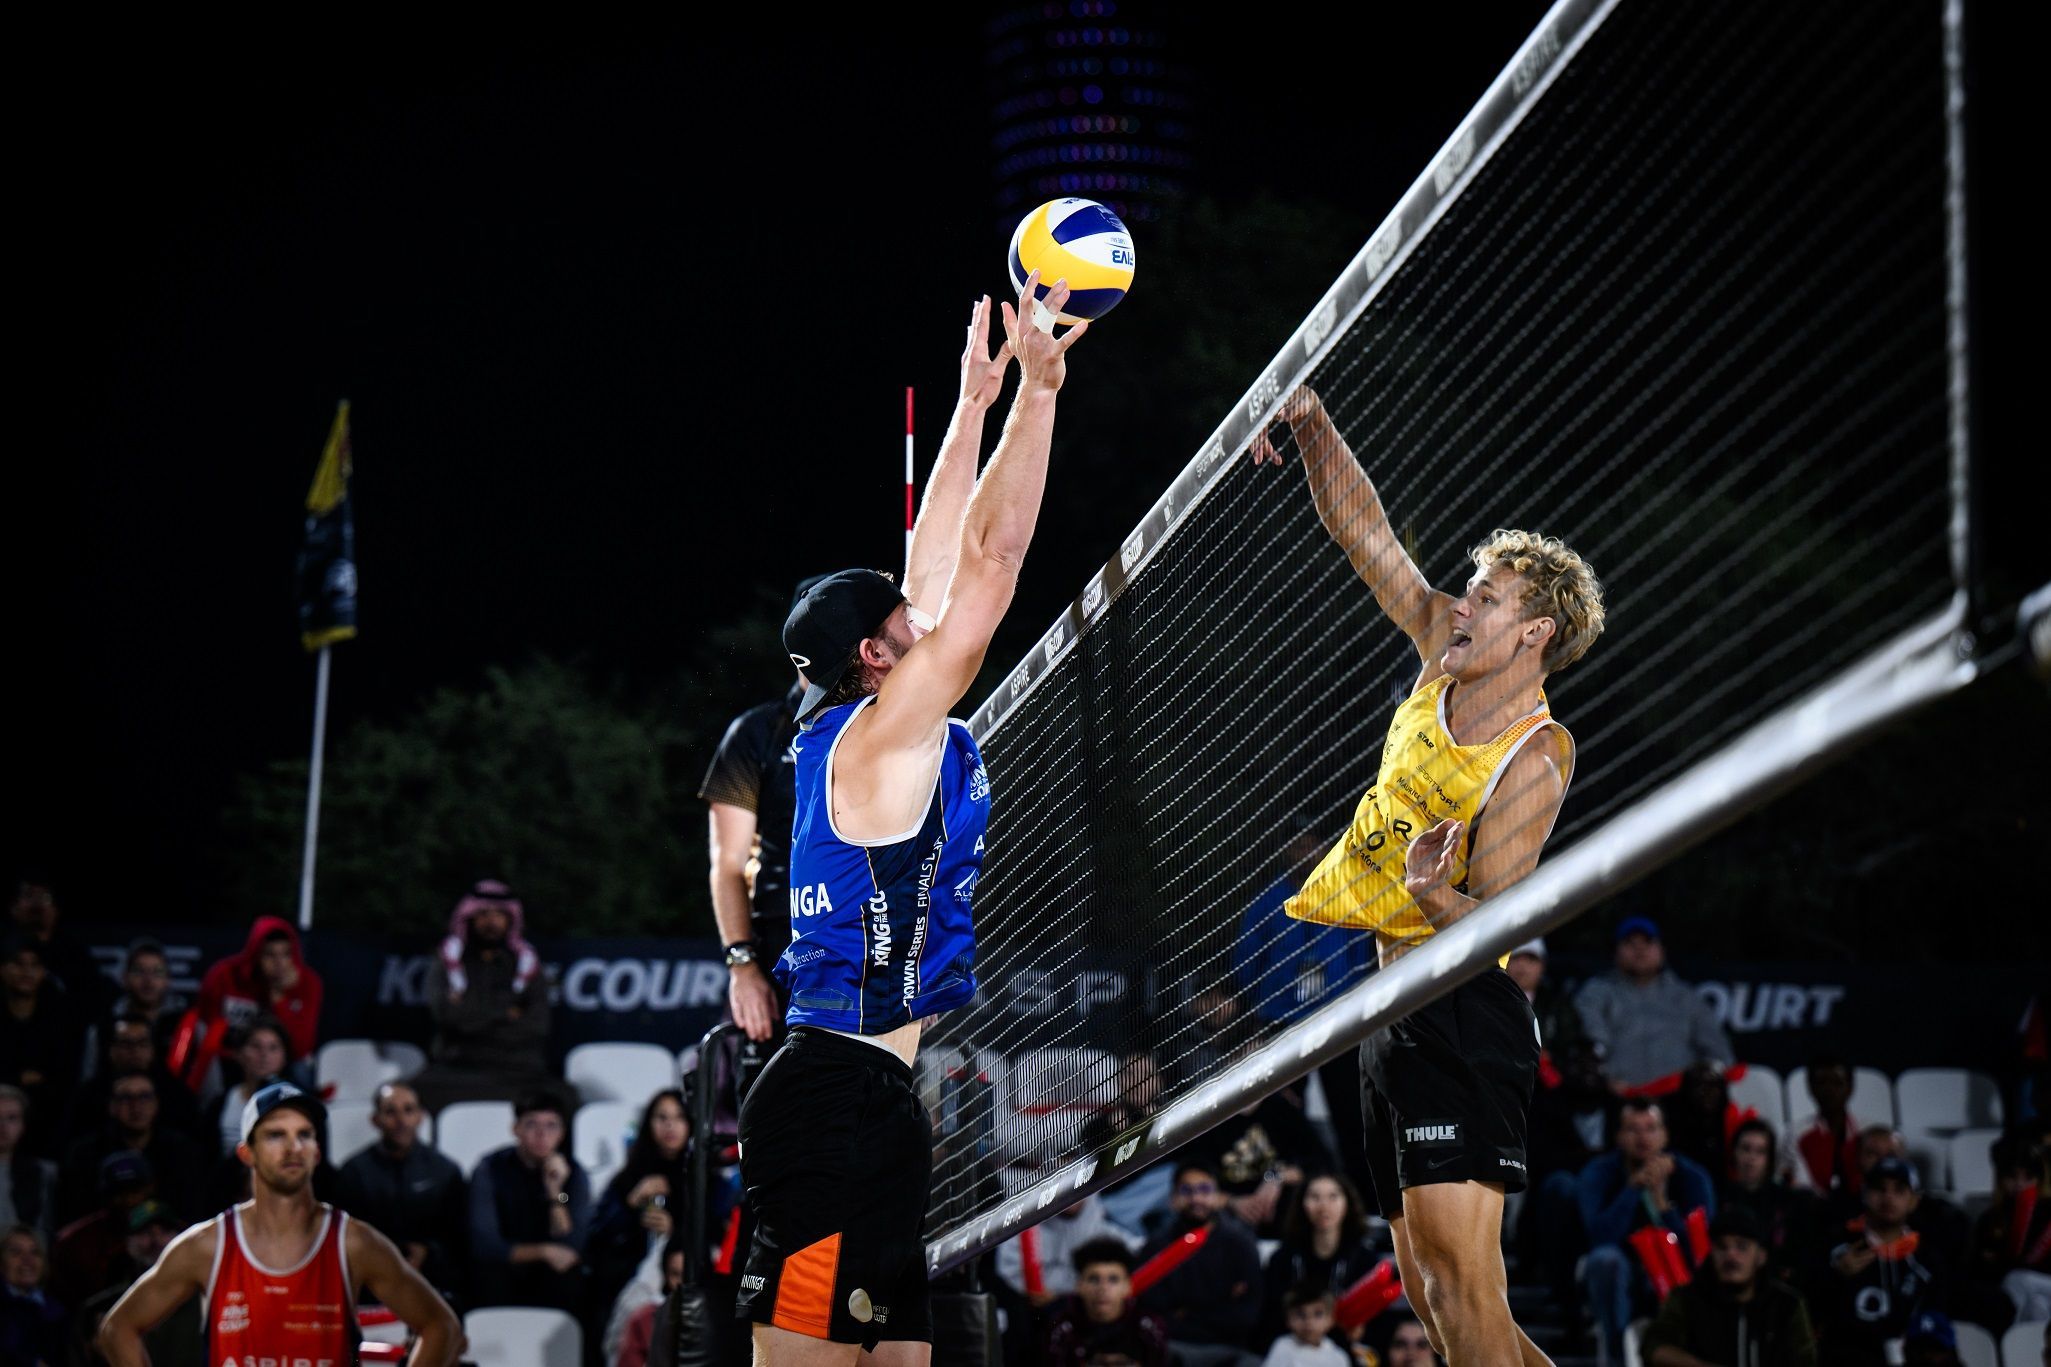 Switzerland and Germany take silver and bronze at King of the Court Finals 2022